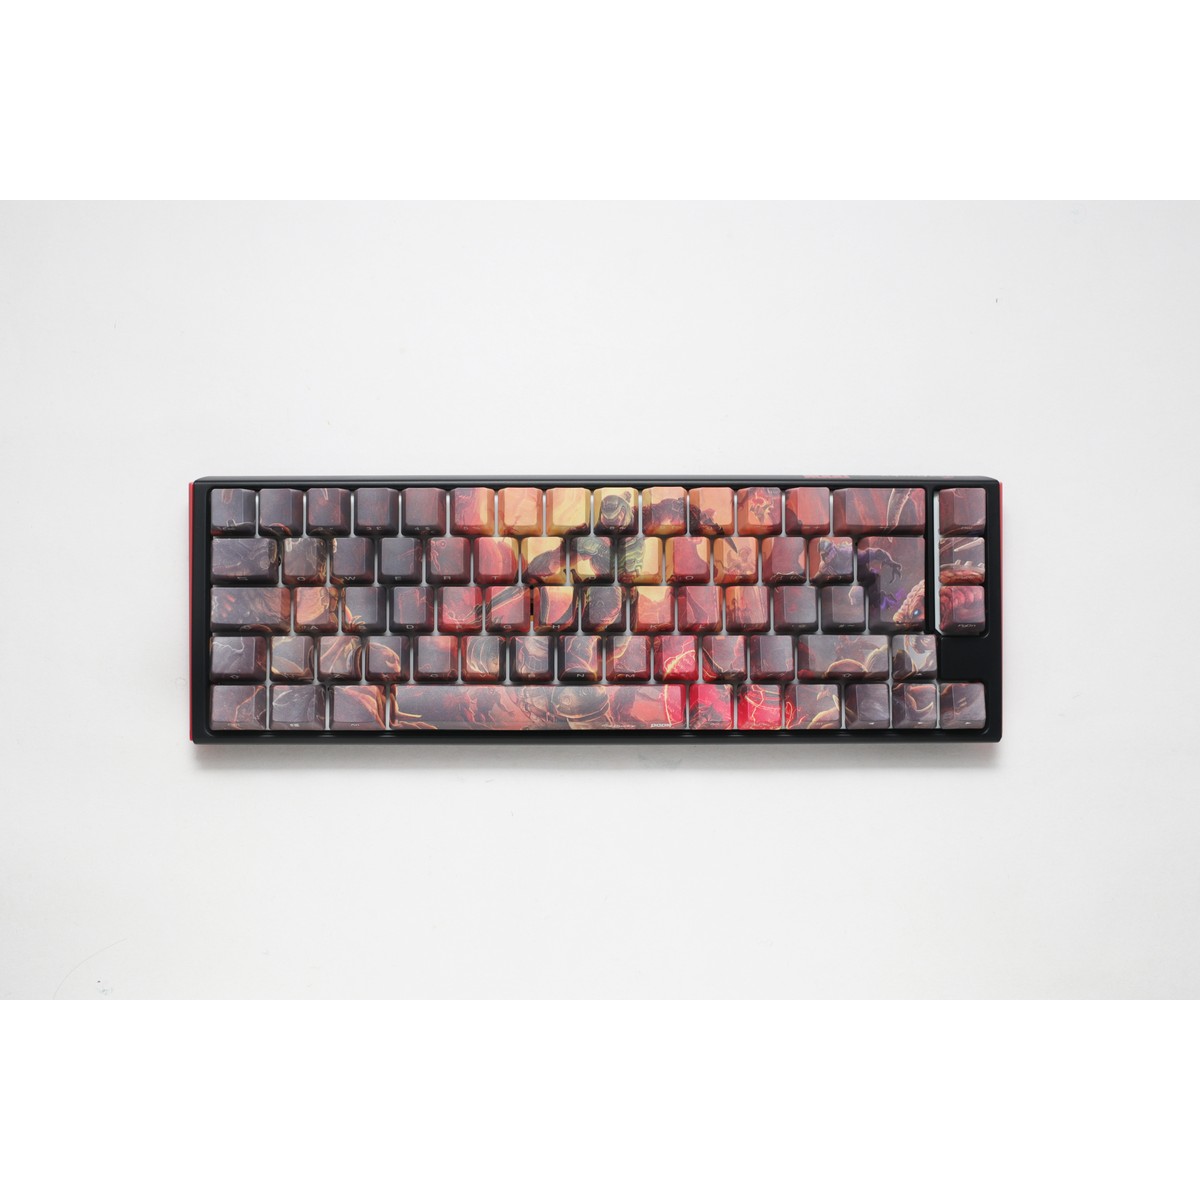 Ducky x DOOM SF 65% Gaming Keyboard Limited Edition Cherry MX Silent Red Switche